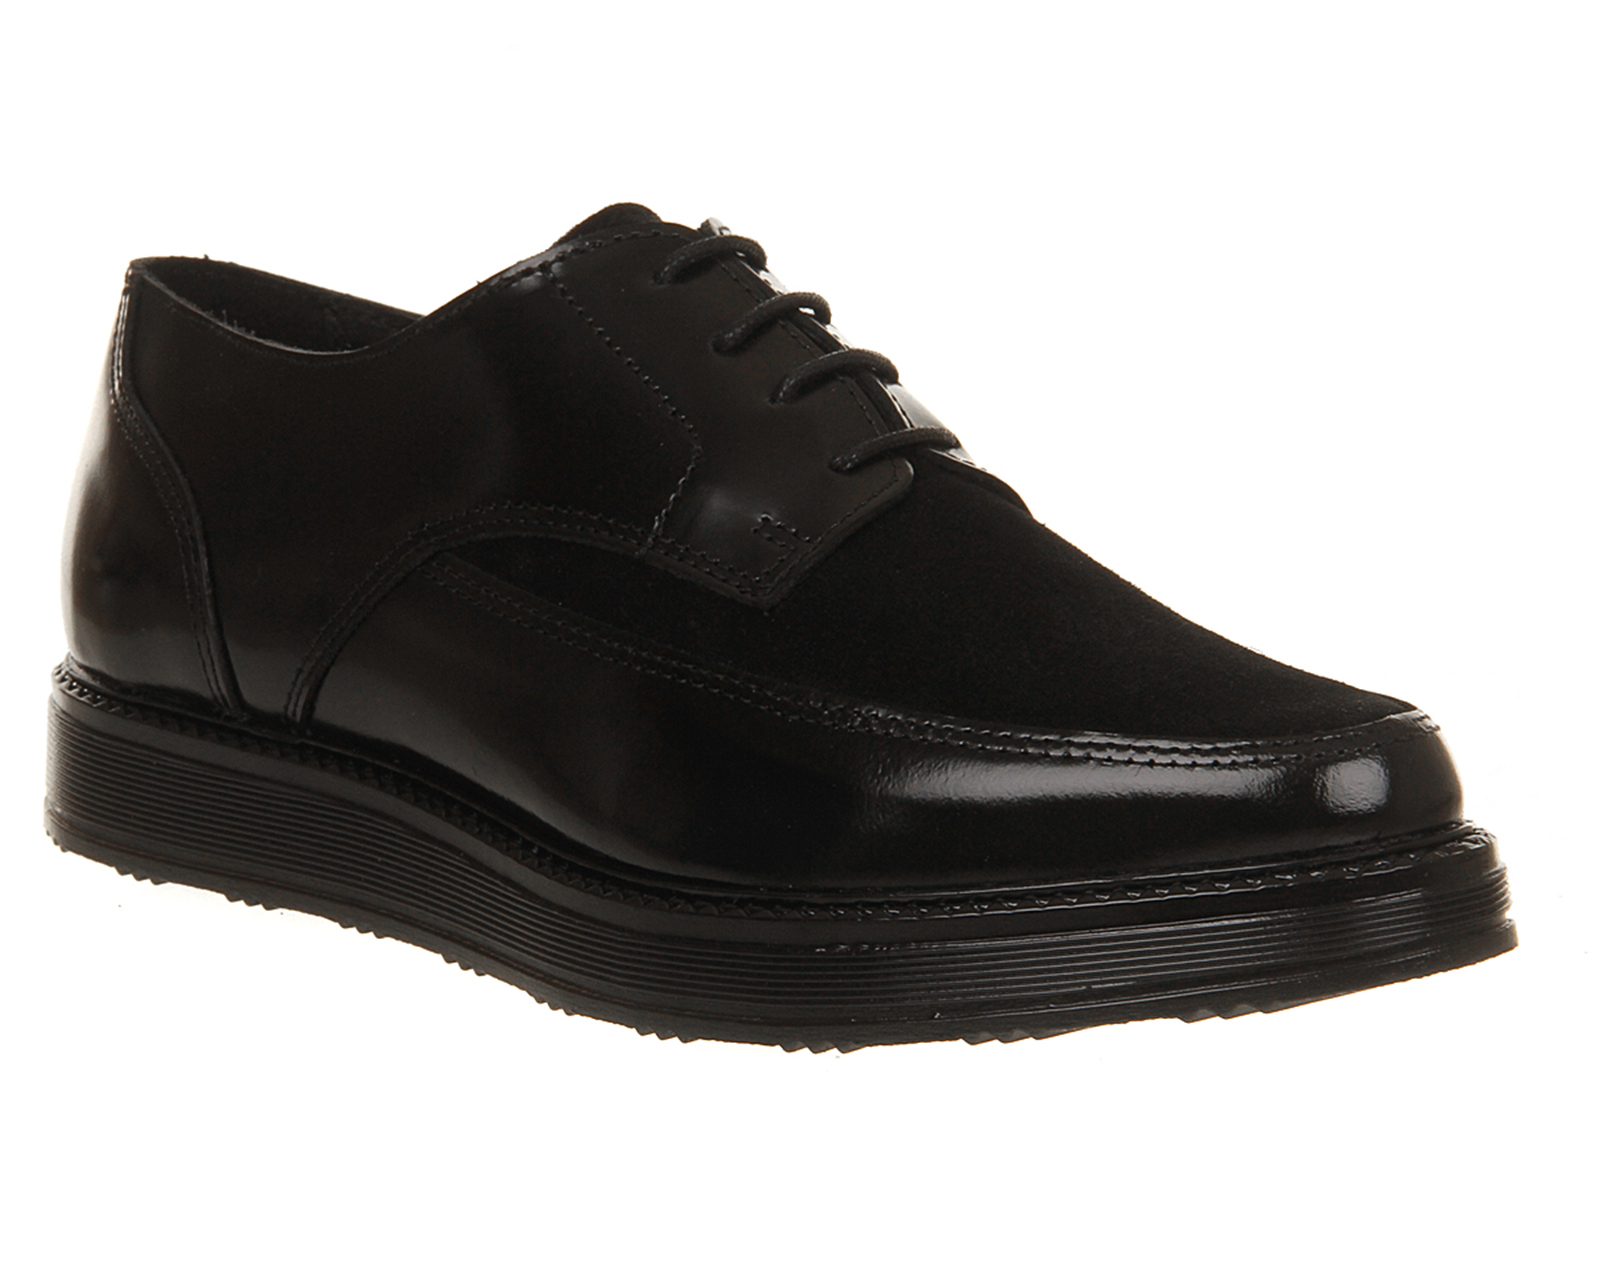 OFFICEValencia Lace Up CreeperBlack Leather